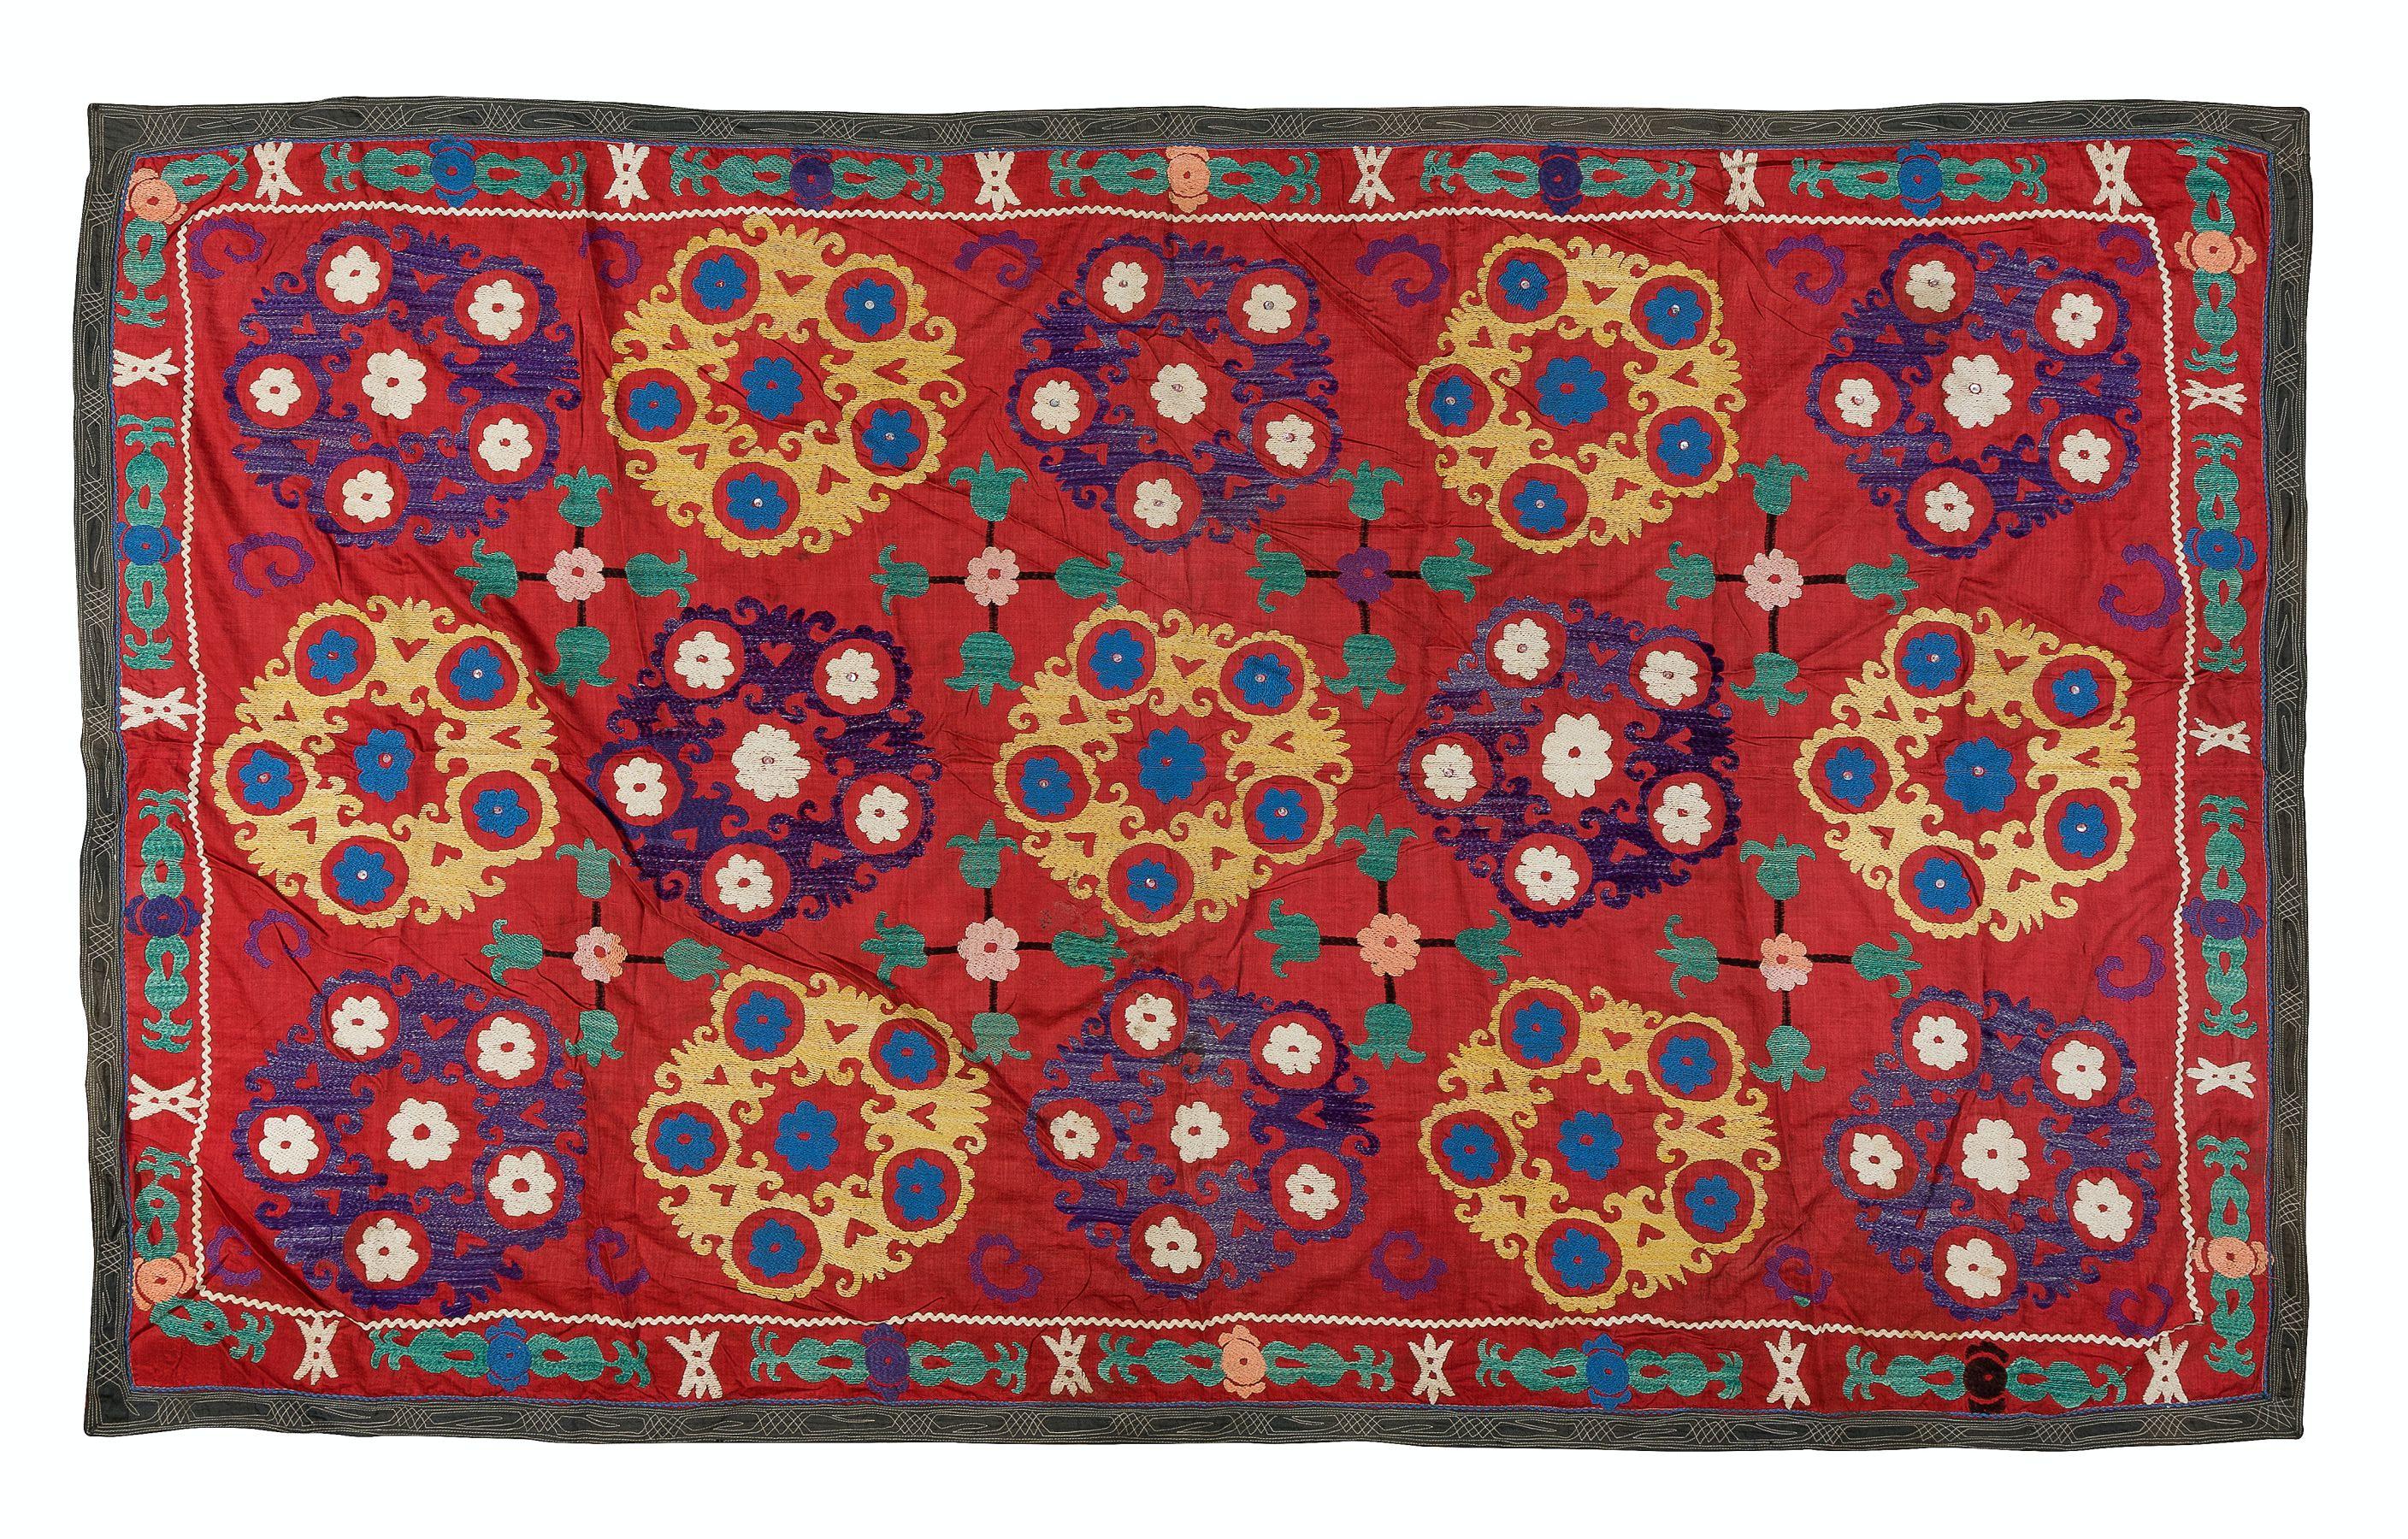 20th Century 4.6x7 Ft Vintage Silk Embroidery Bed Cover, Uzbek Suzani Wall Hanging in Red For Sale